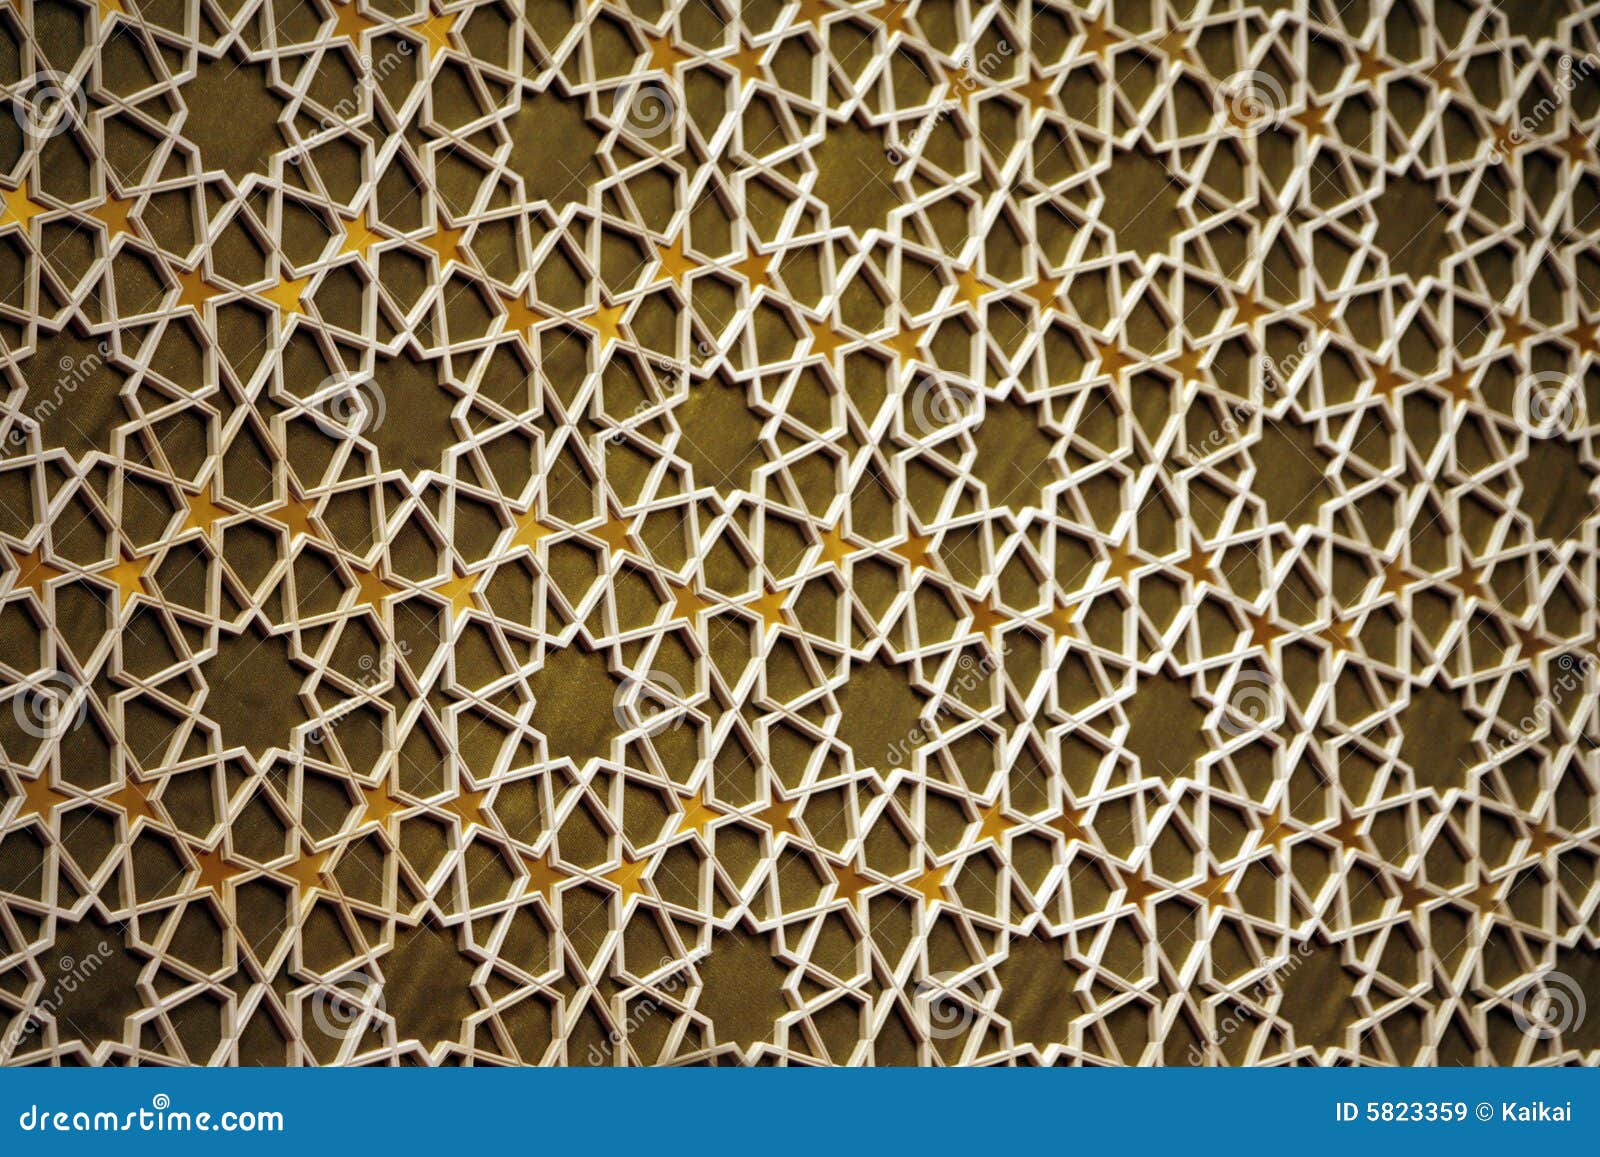 Islamic pattern stock illustration Image of abstract 